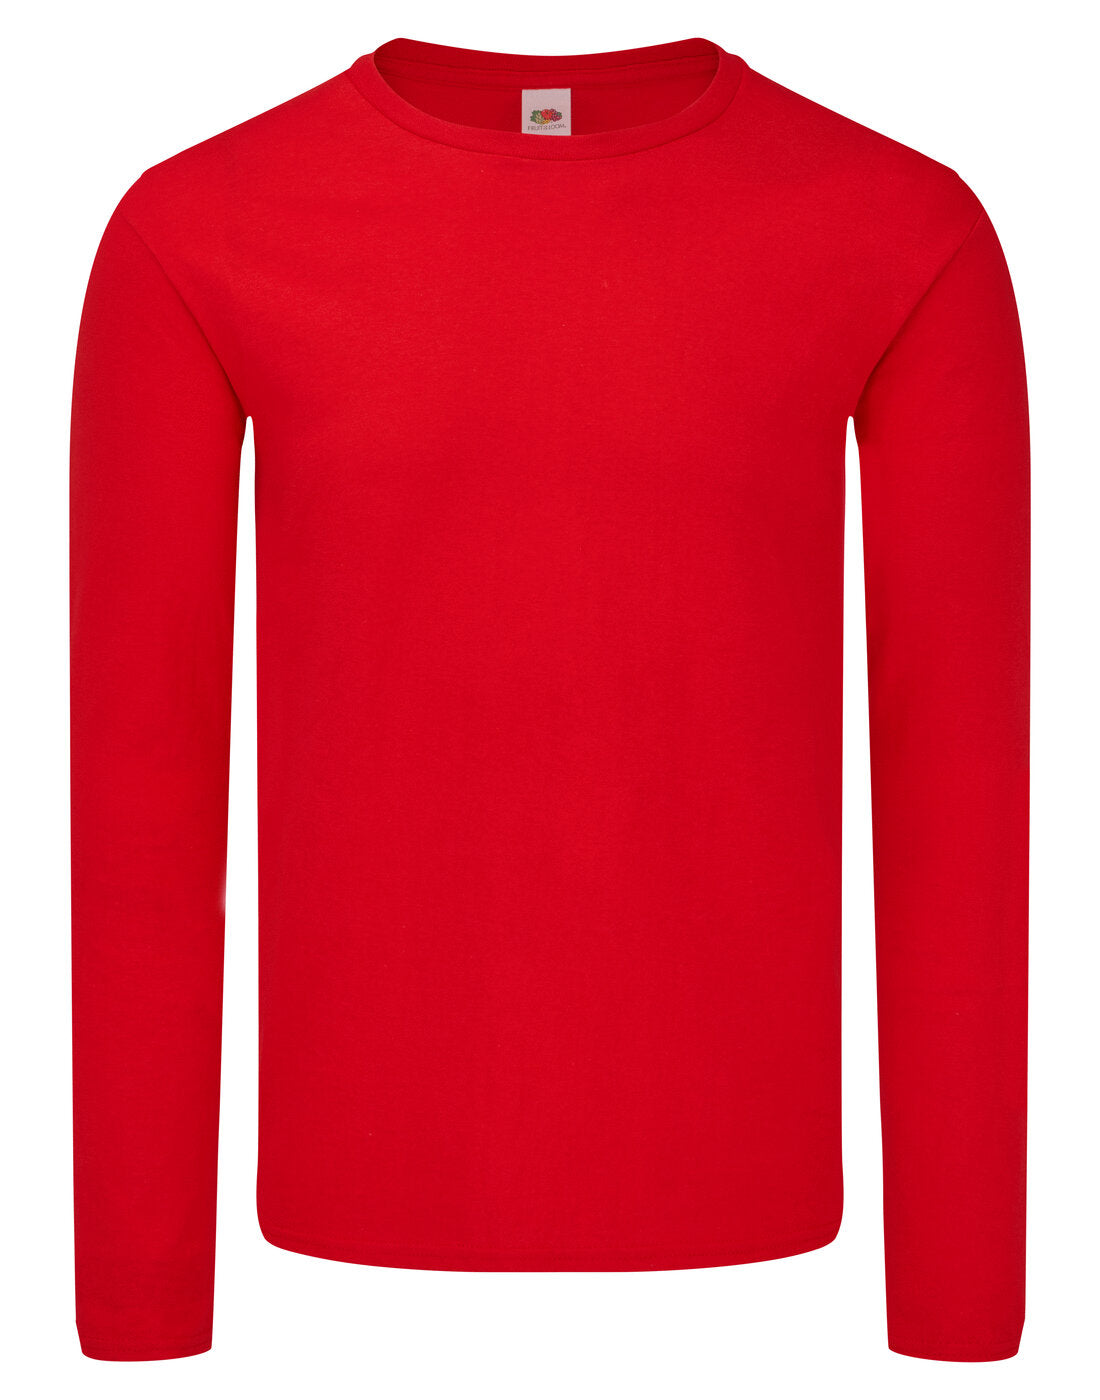 Fruit of the Loom Iconic 150 Classic Long Sleeve T - Red